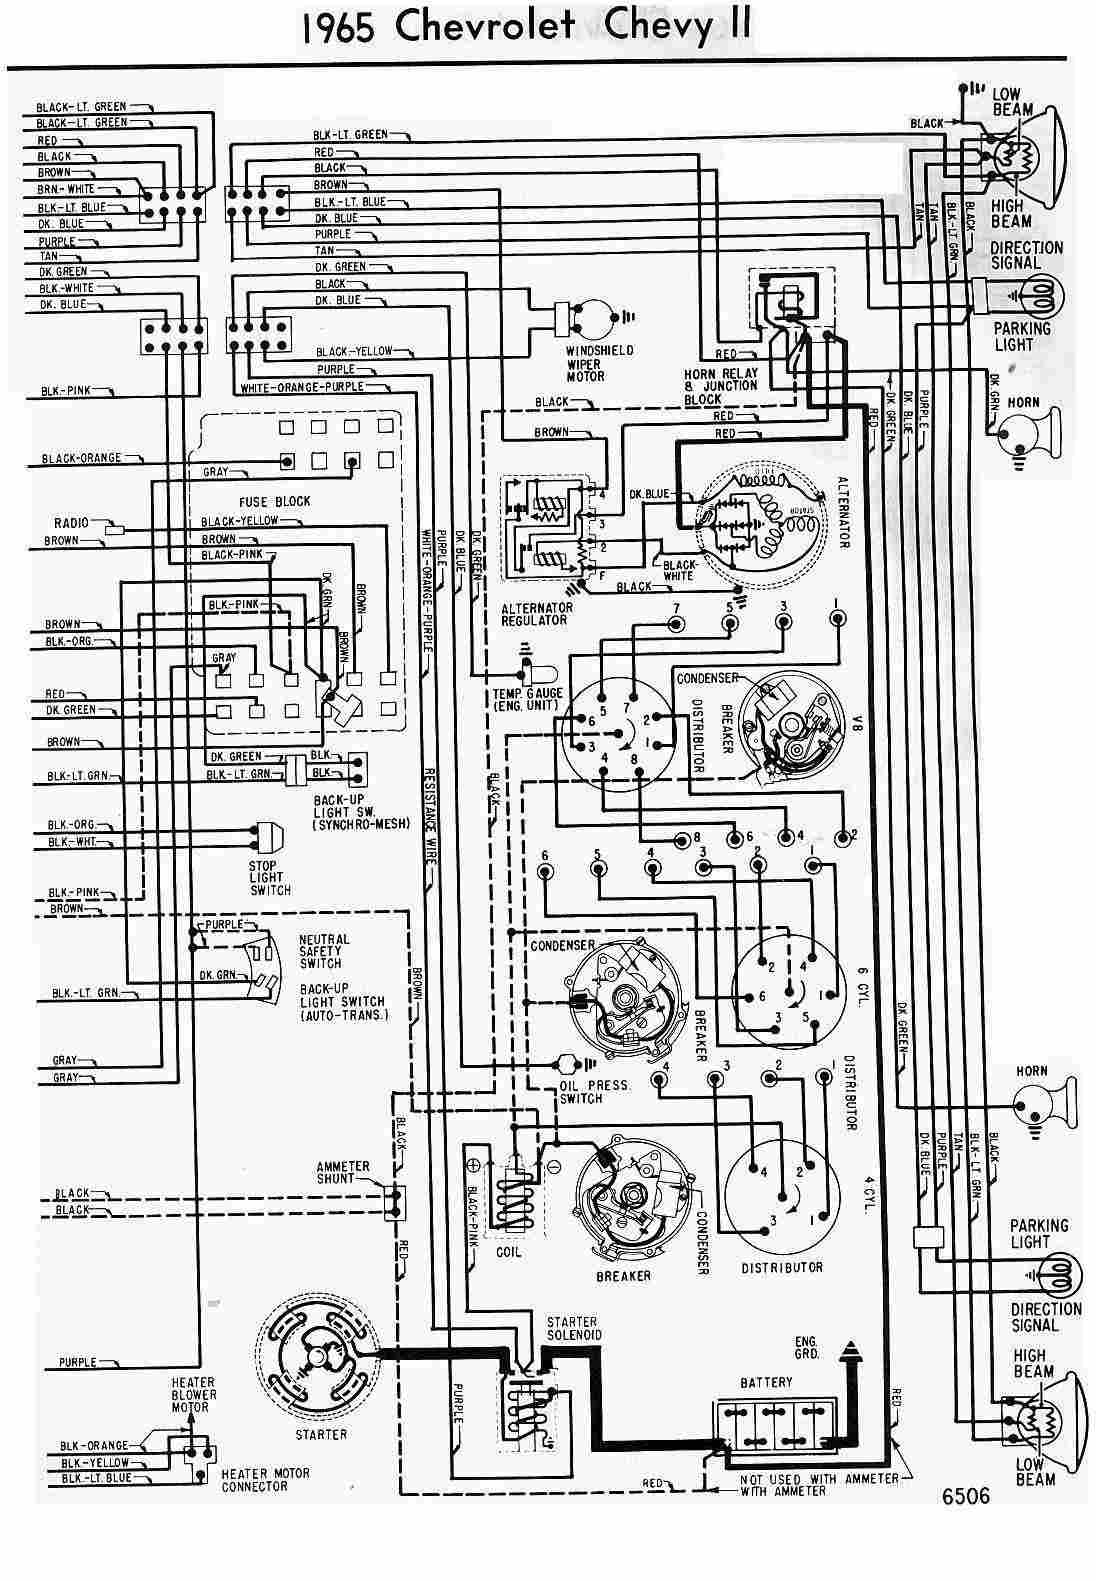 Wiring For 1965 Chevy Truck